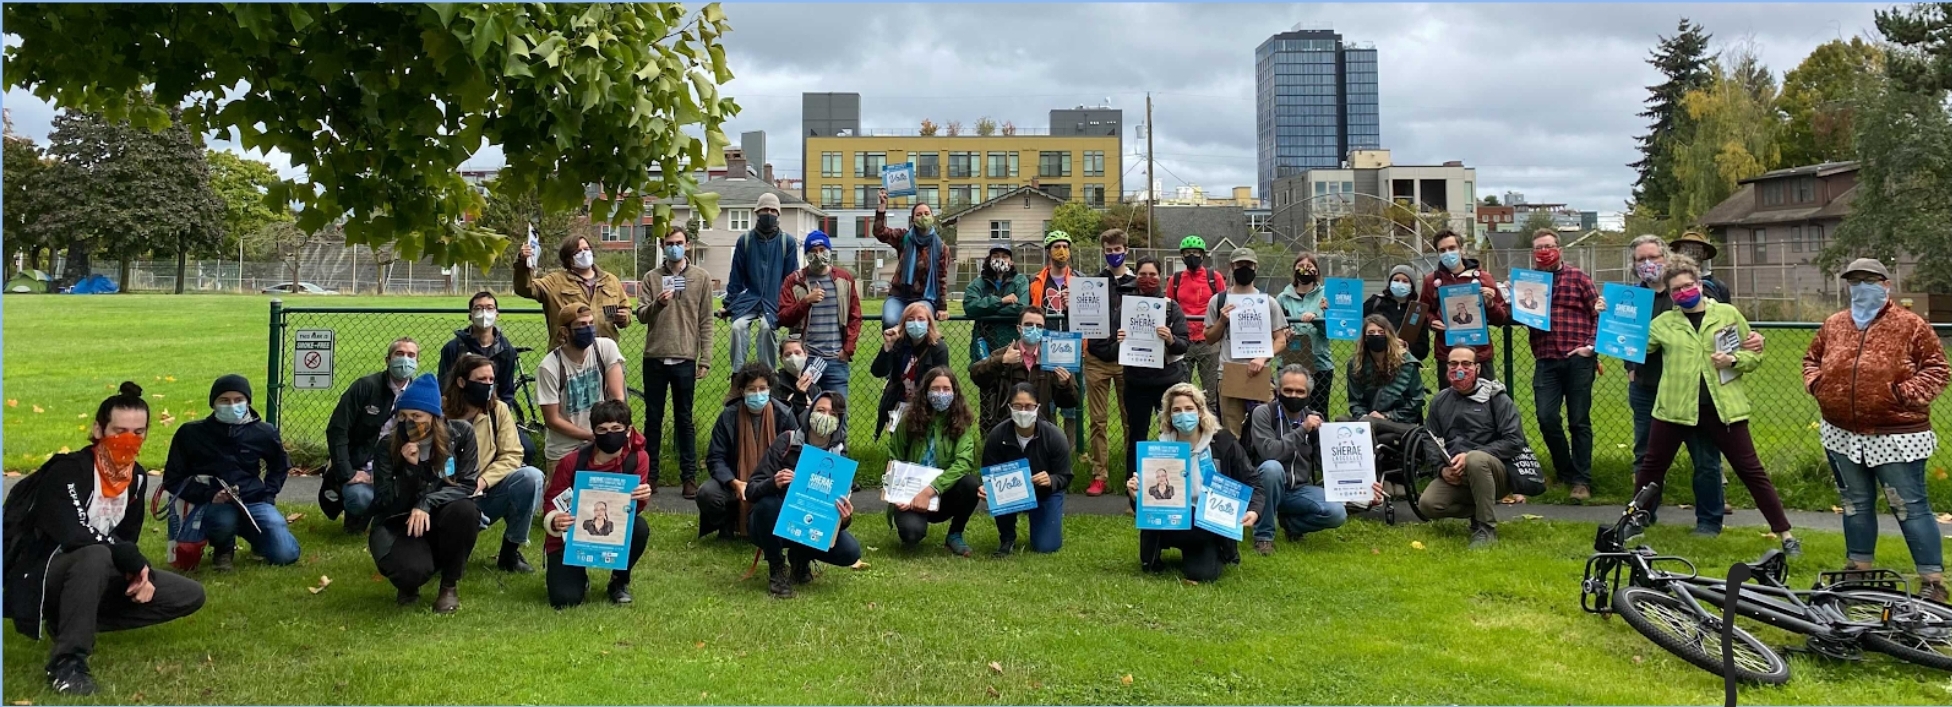 Photo of Seattle DSA members at University Playground, preparing to canvass in support of the Sherae for State campaign on a fall, overcast Seattle day.